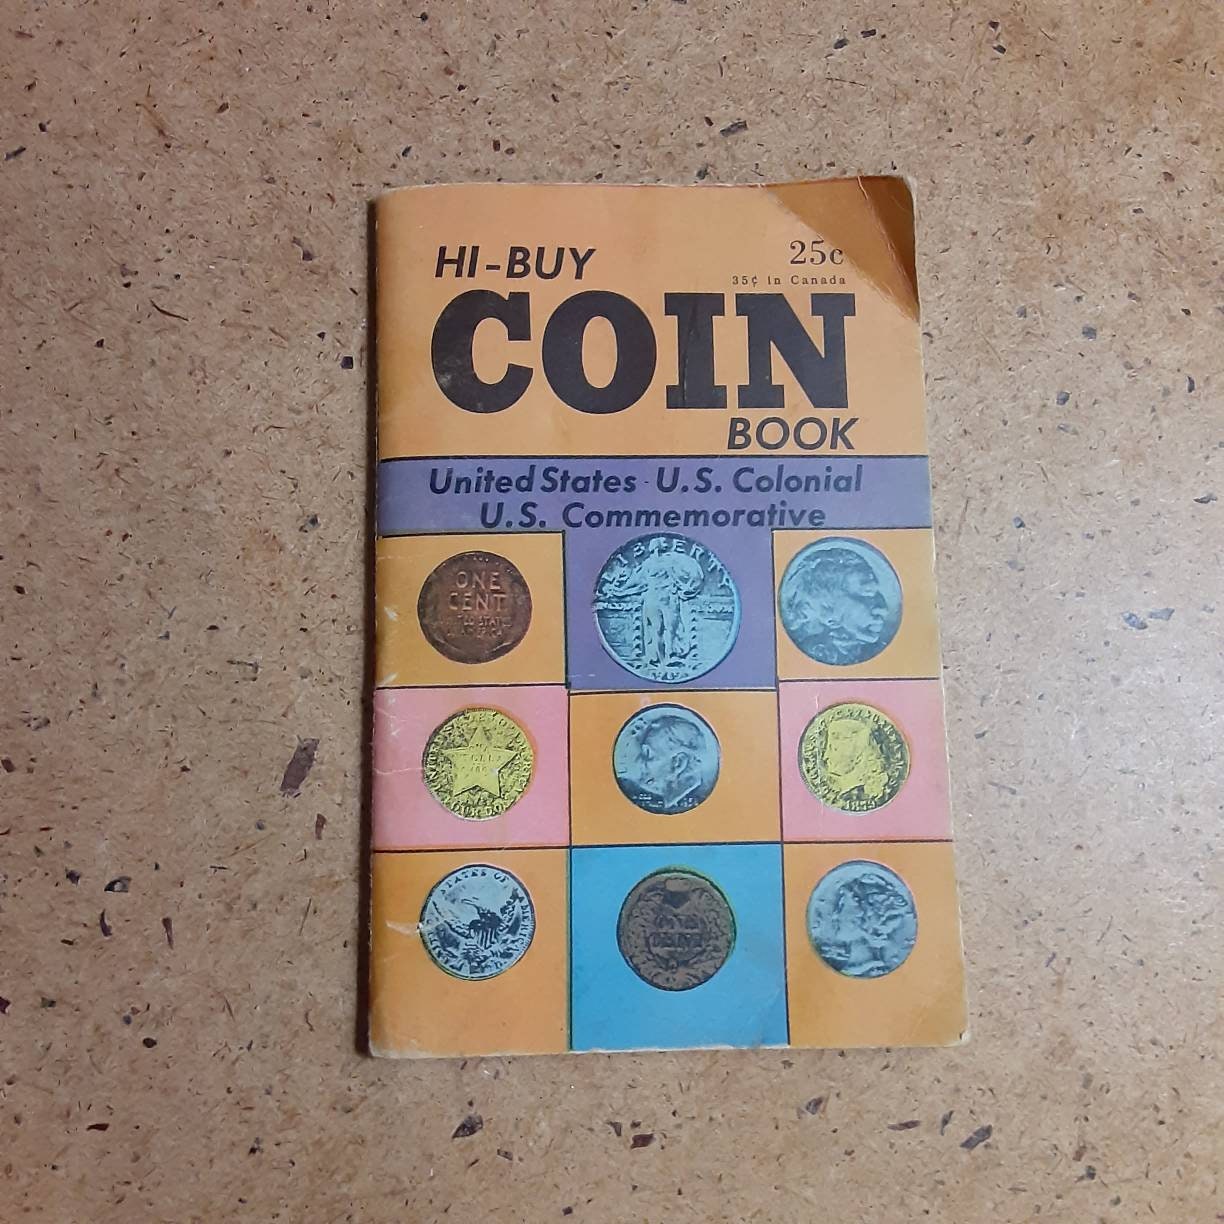 Vintage Hi-buy Coin Book Guide for Coin Selling Collecting Sorting